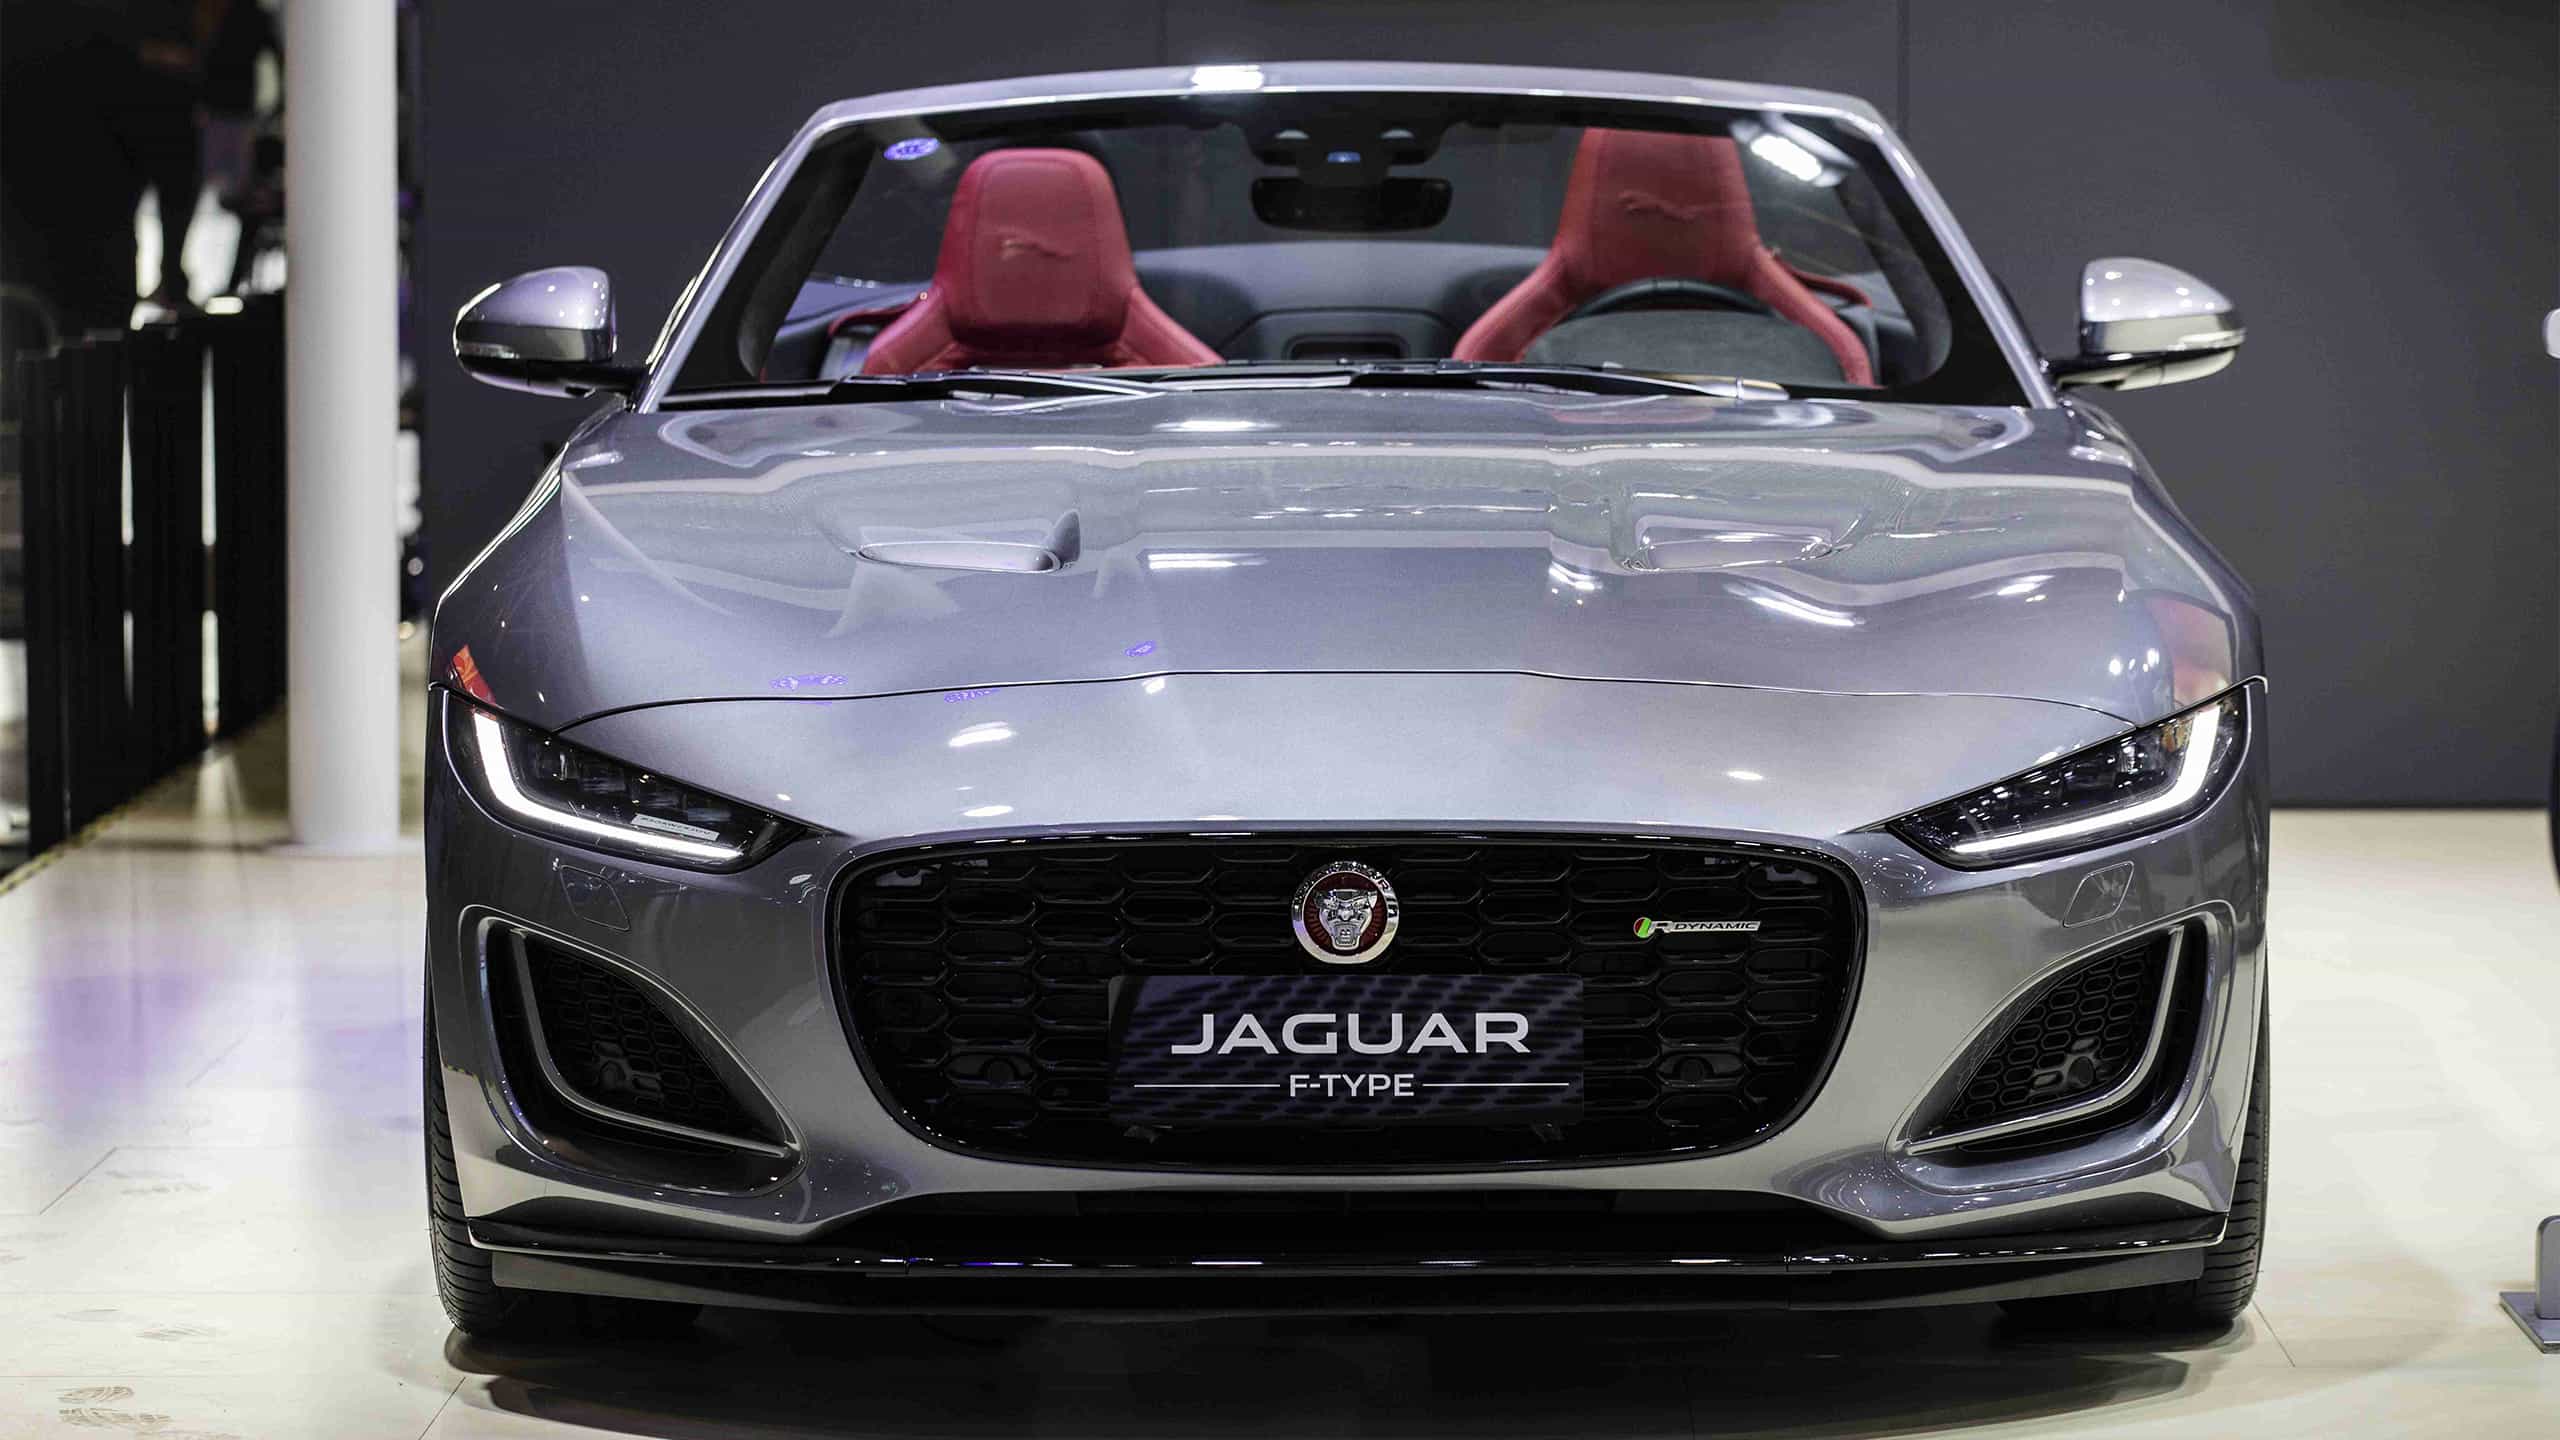 Jaguar F-TYPE Convertible R Dynamic Black in Auto Expo